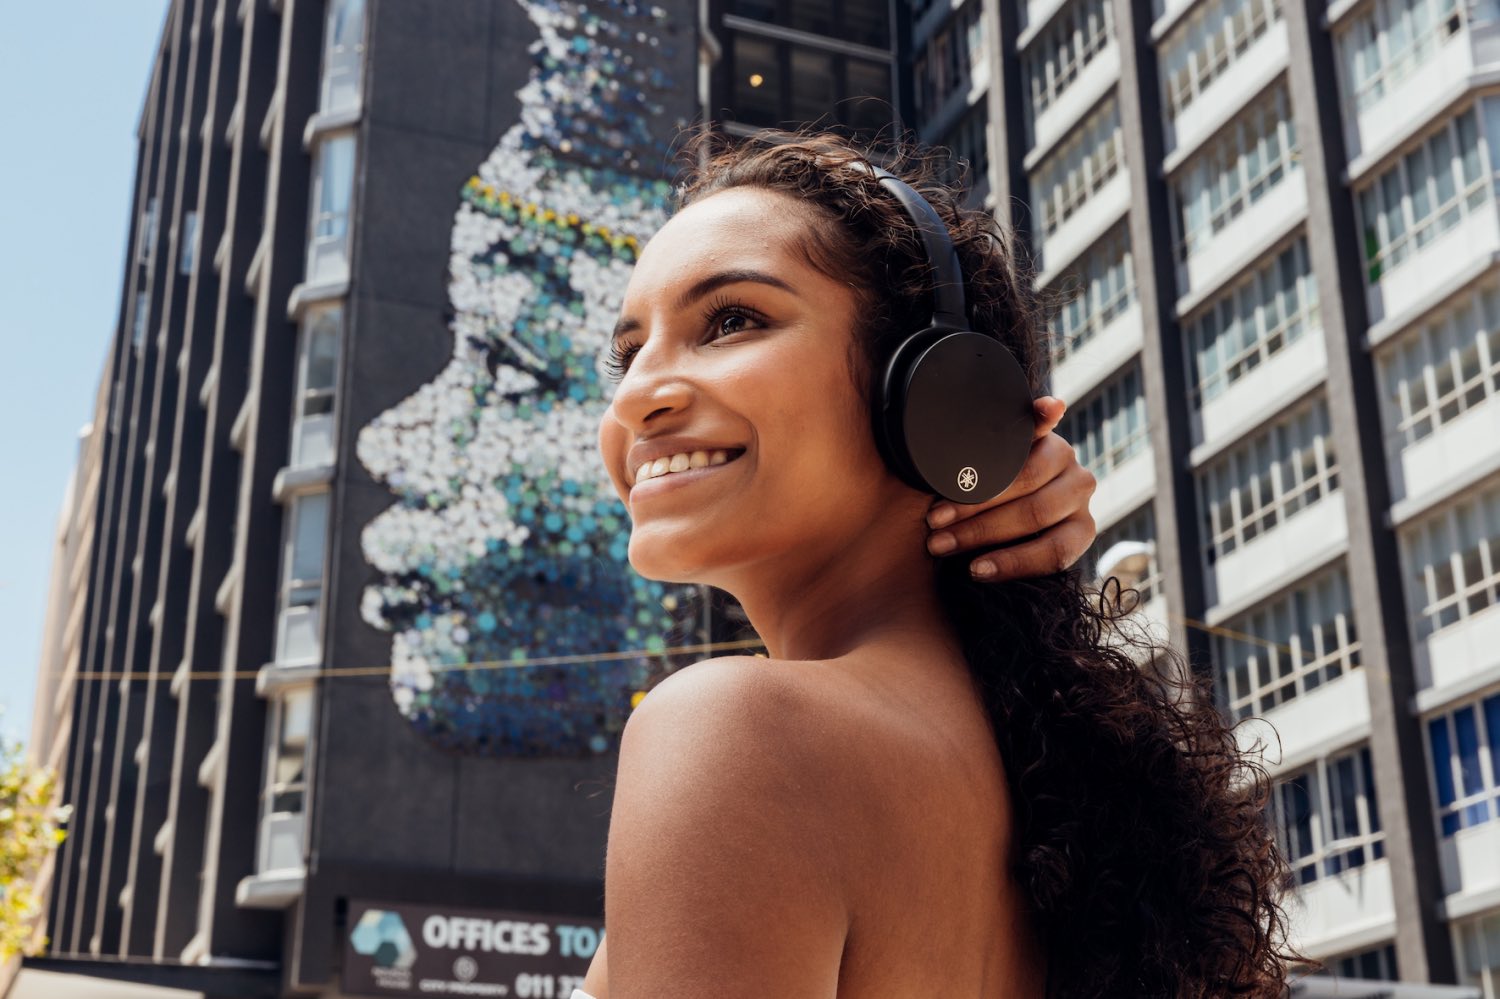 The Yamaha YH-E500 Headphones are now available in South Africa, and after testing them out over the past few weeks we were pleasantly impressed. The perfect headphones for on-the-go, work, and play use.